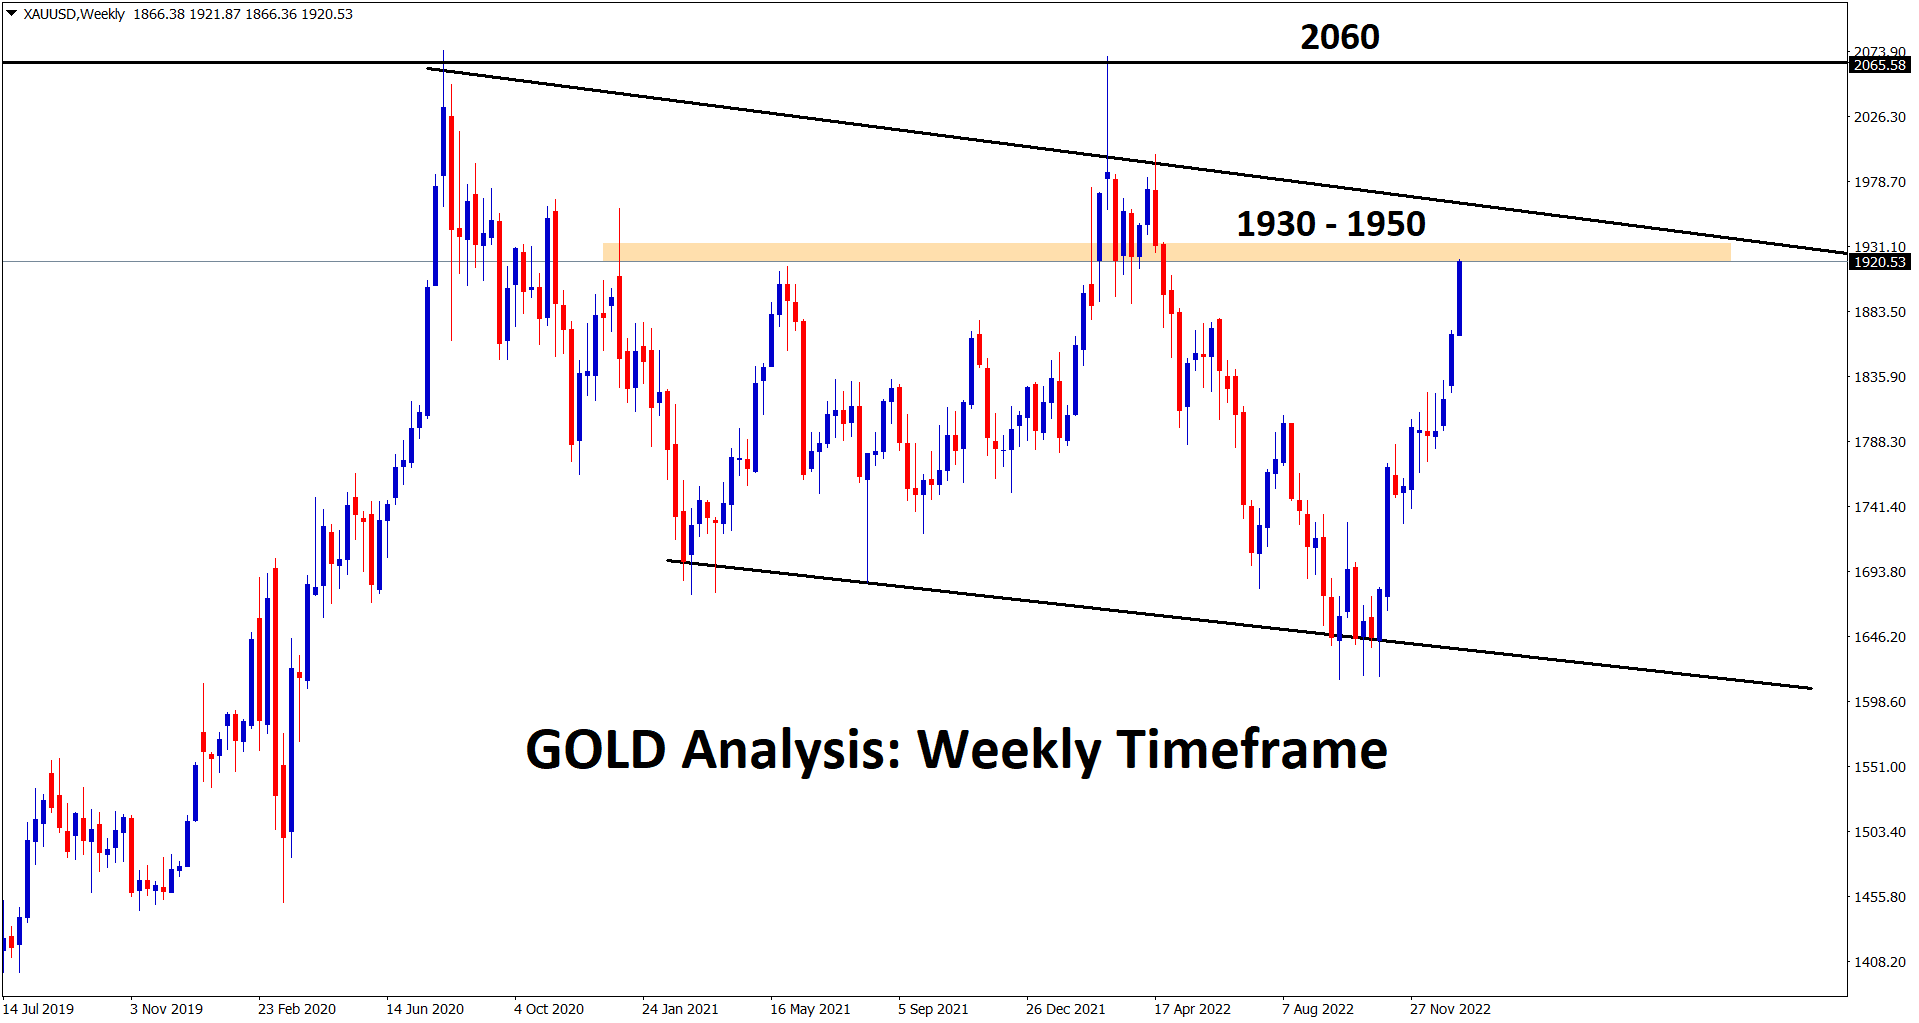 Gold going to reach near the resistance 1930